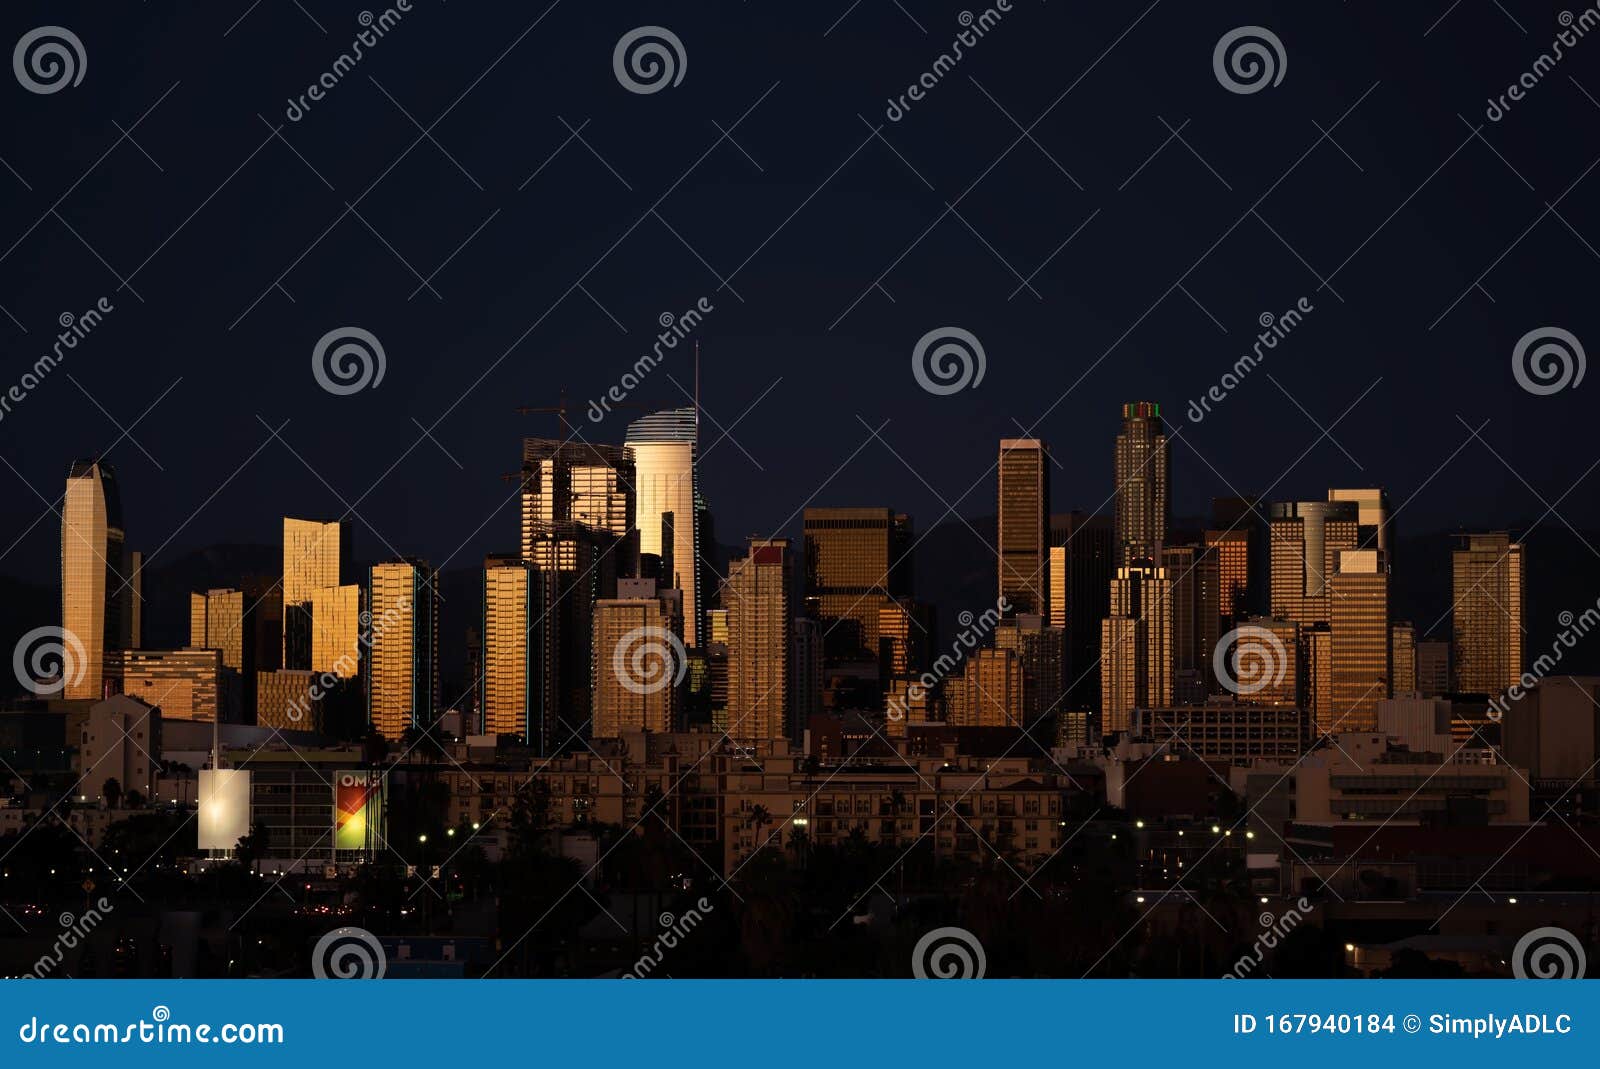 amazing night shot of los angeles downtown with highrises reflecting evening light